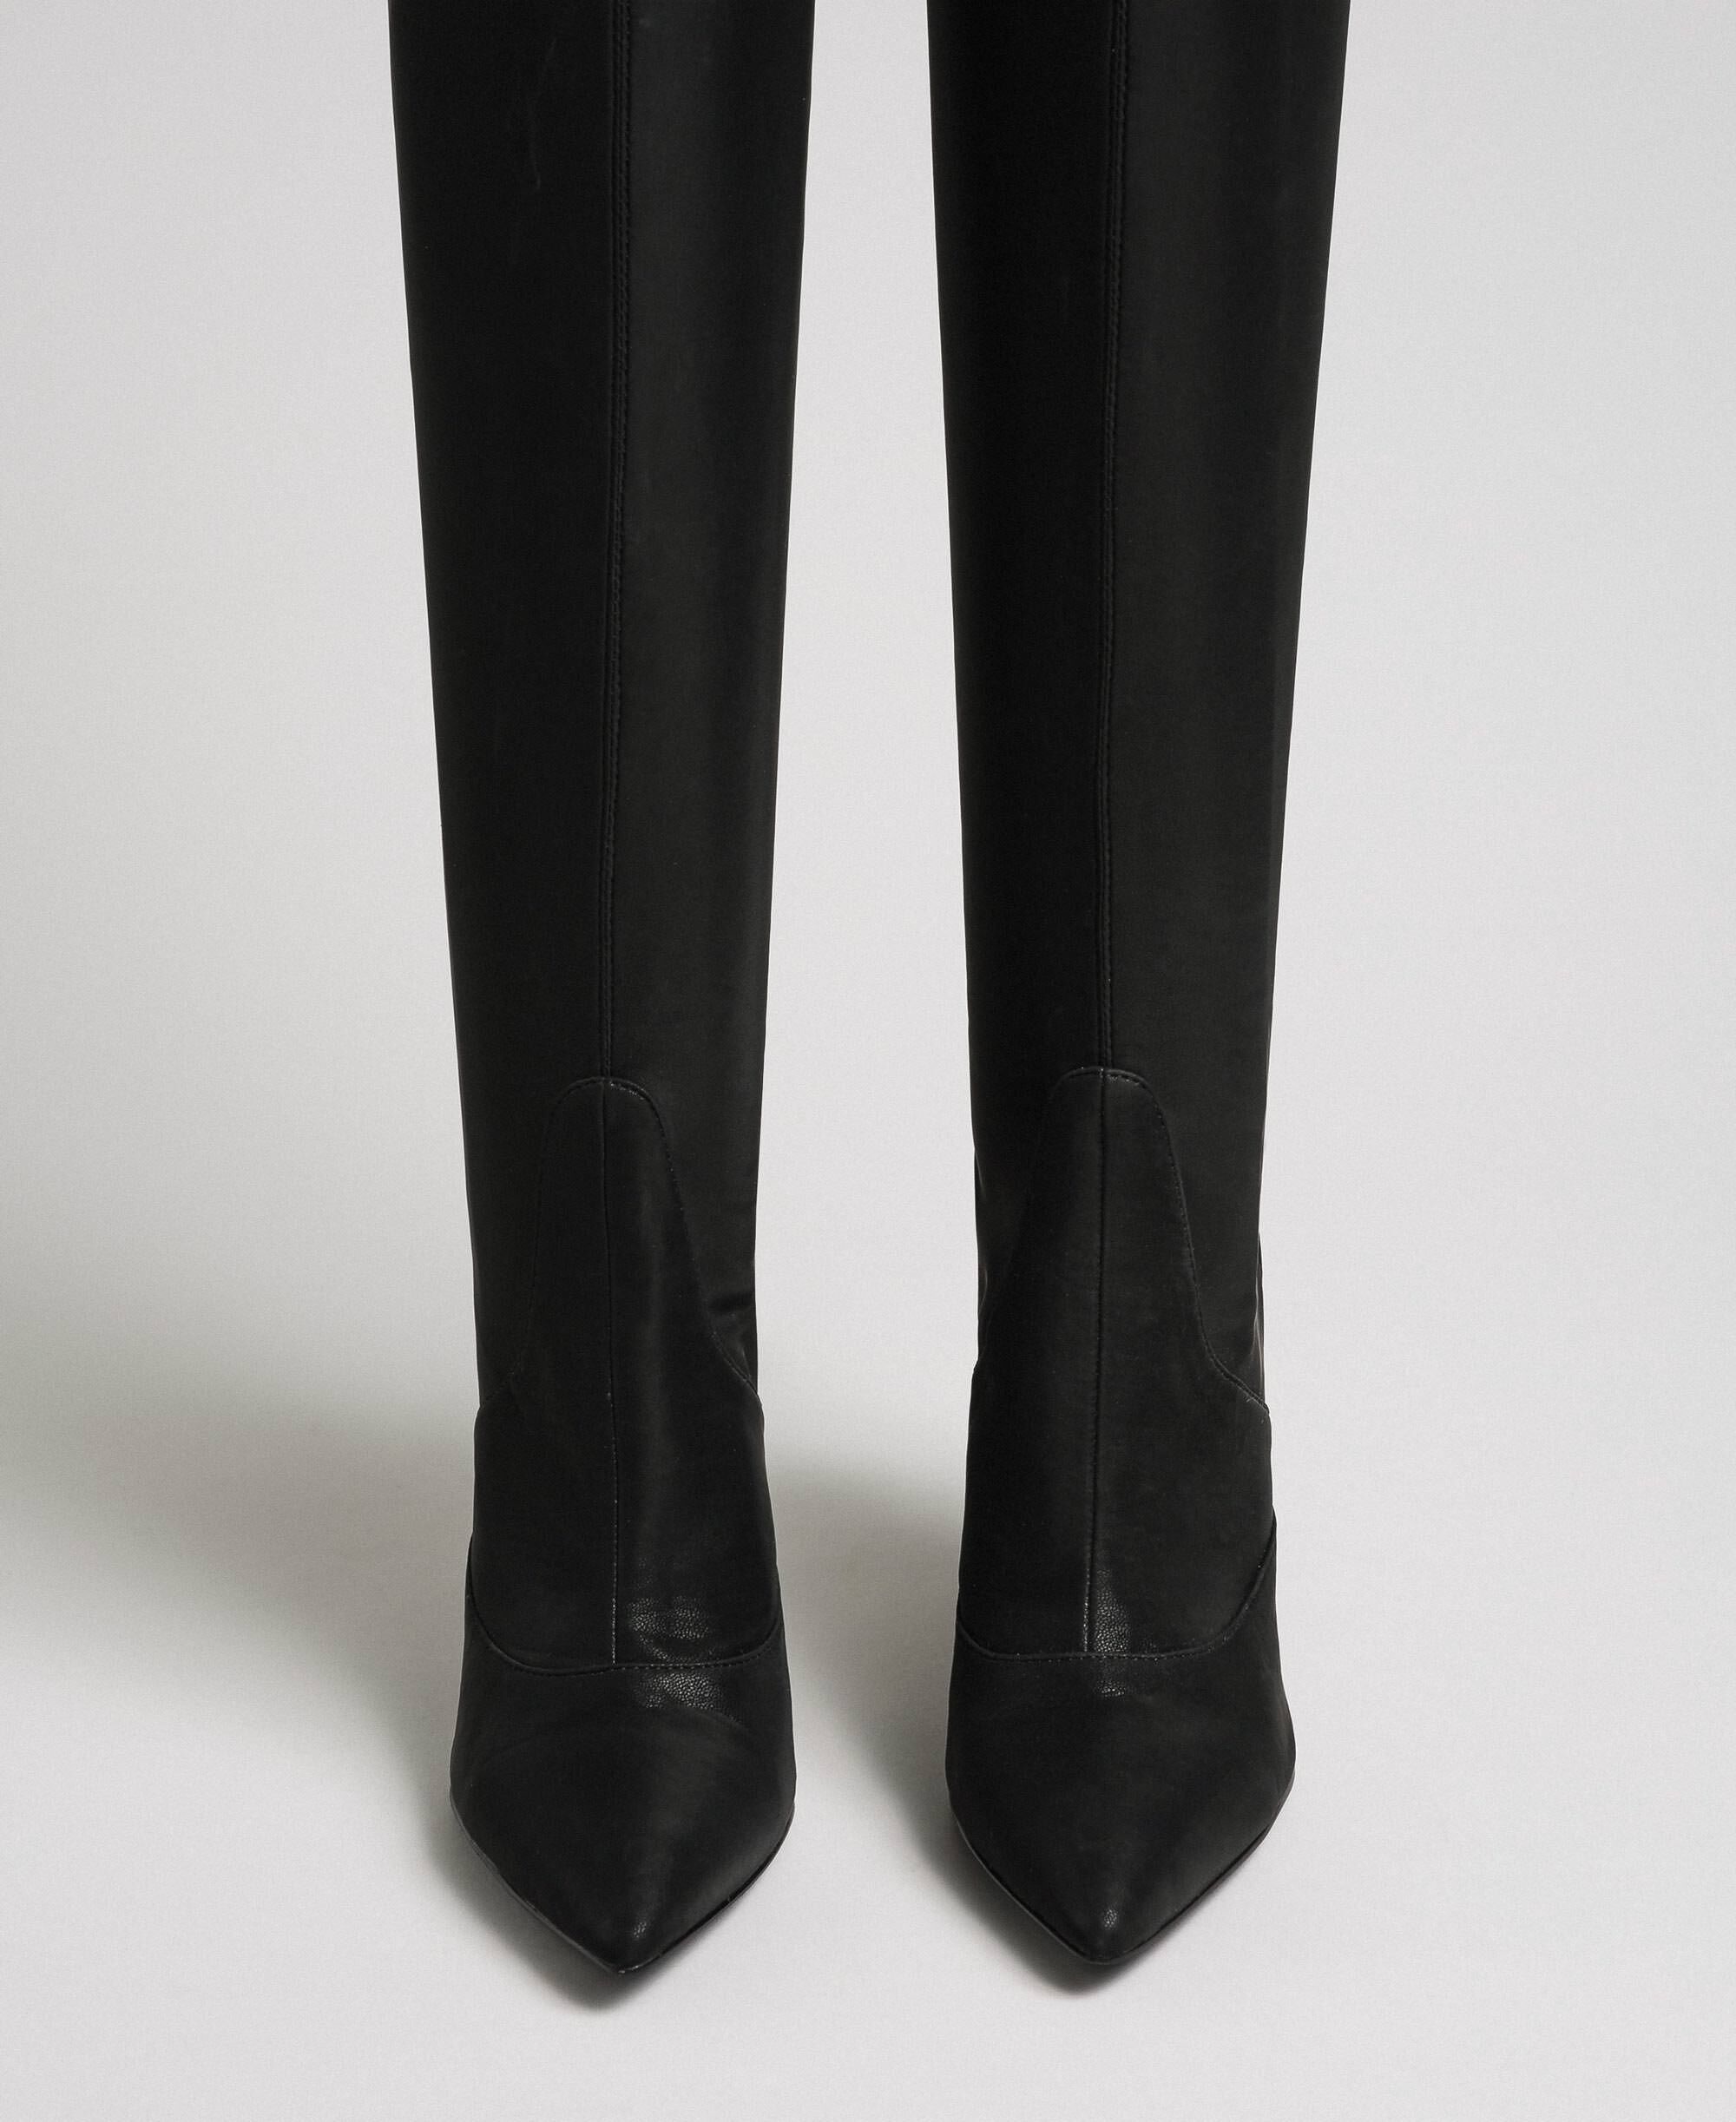 leather stiletto thigh high boots